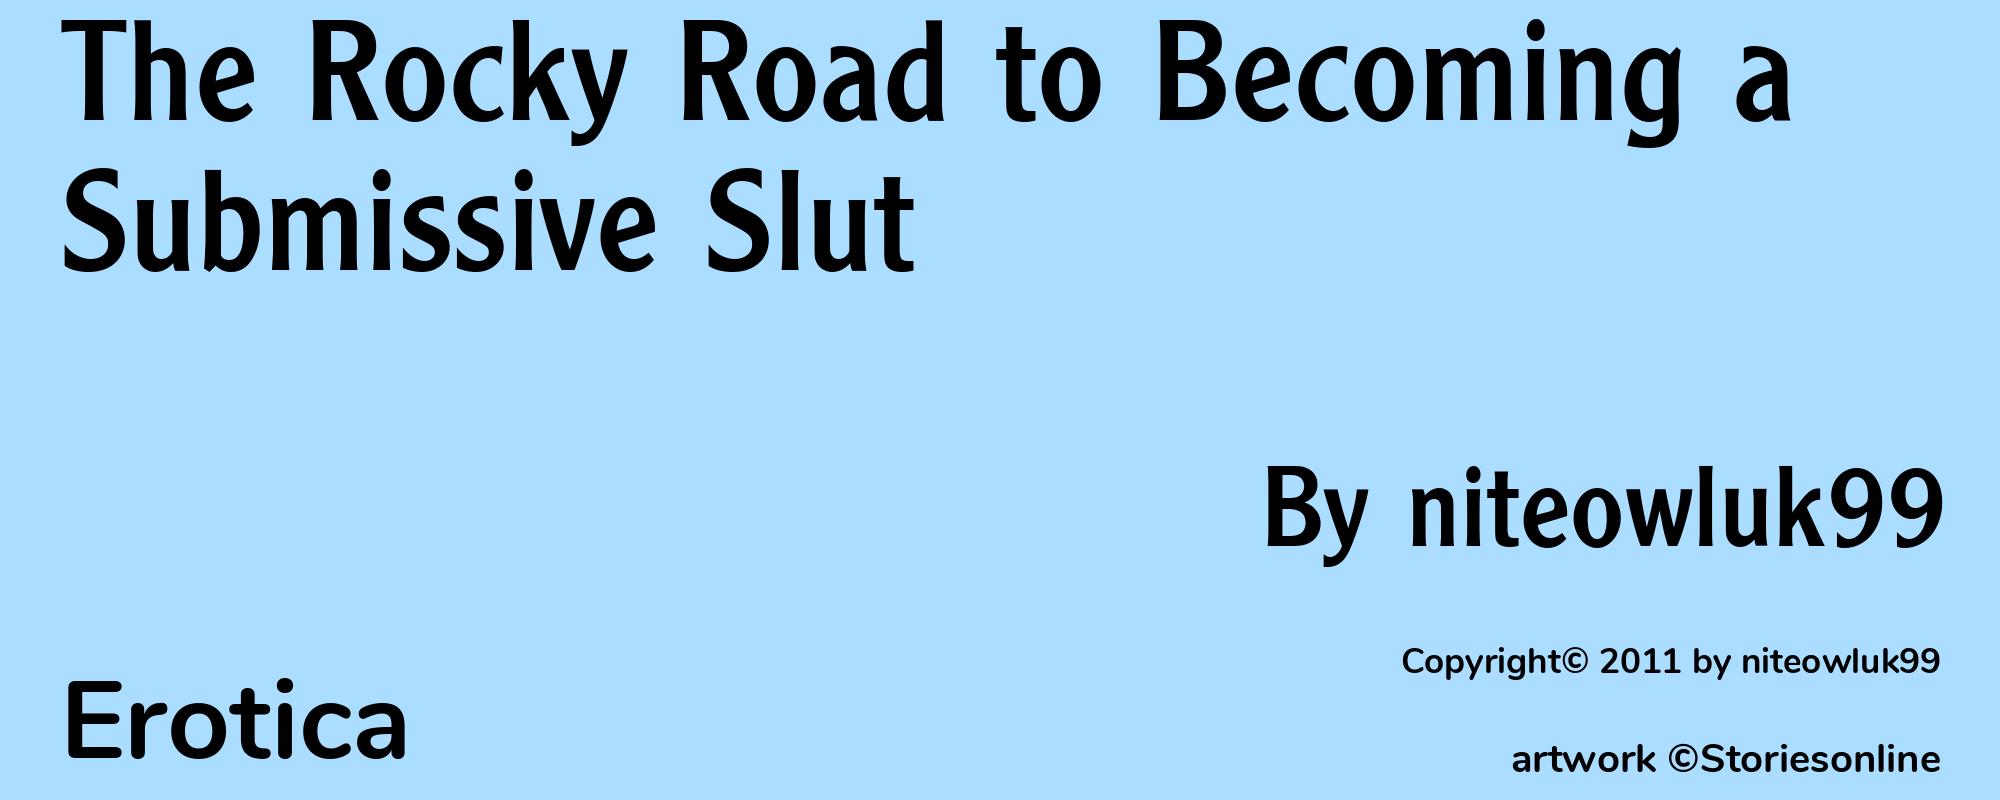 The Rocky Road to Becoming a Submissive Slut - Cover